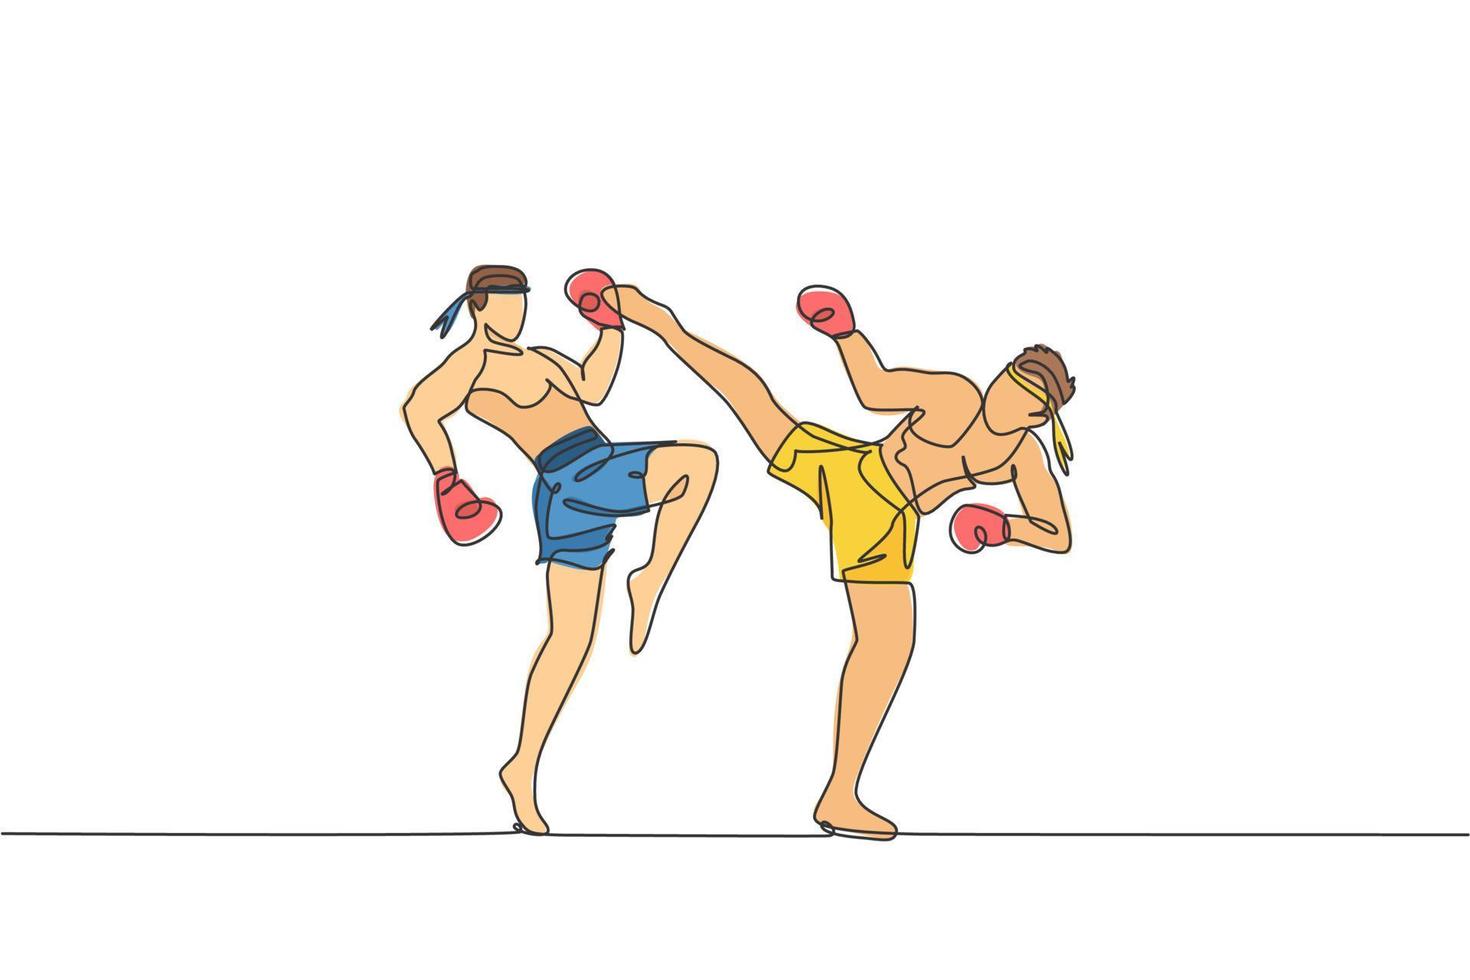 One single line drawing of two young energetic muay thai fighter men fight sparring at gym fitness center vector illustration. Combative thai boxing sport concept. Modern continuous line draw design